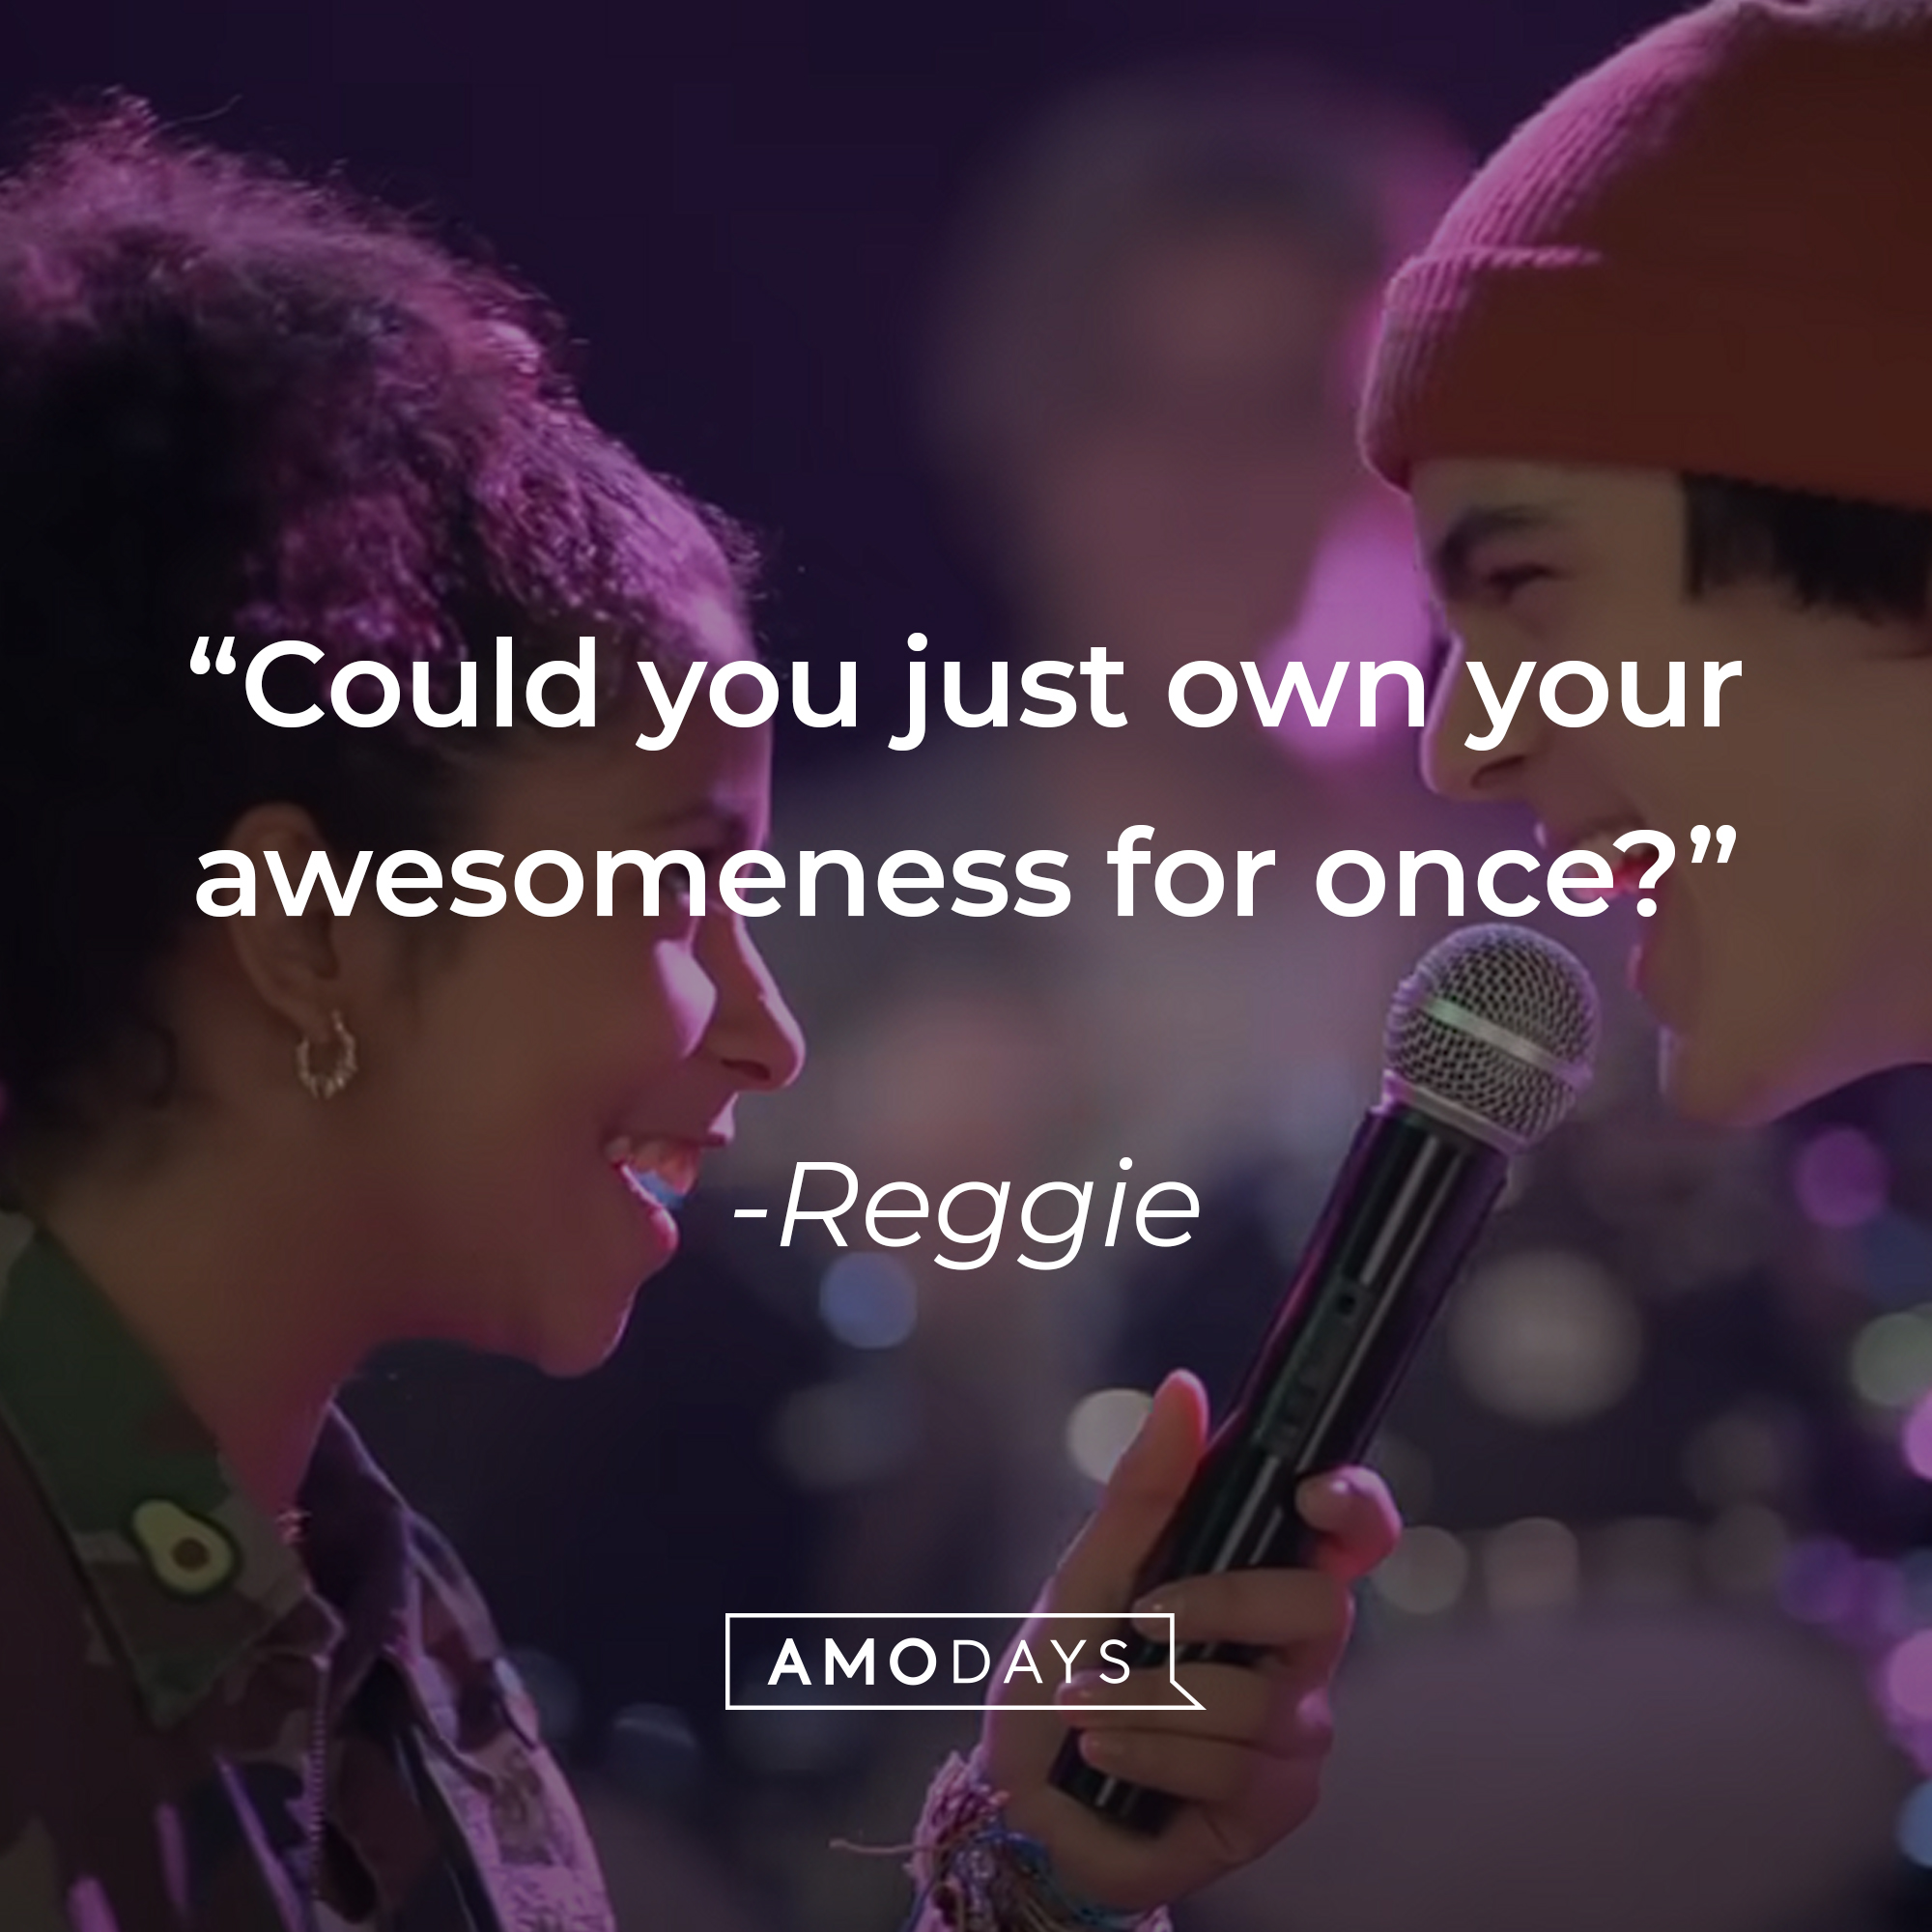 An image of Julie with Reggie and his quote: “Could you just own your awesomeness for once?” |Source: youtube.com/netflixafterschool